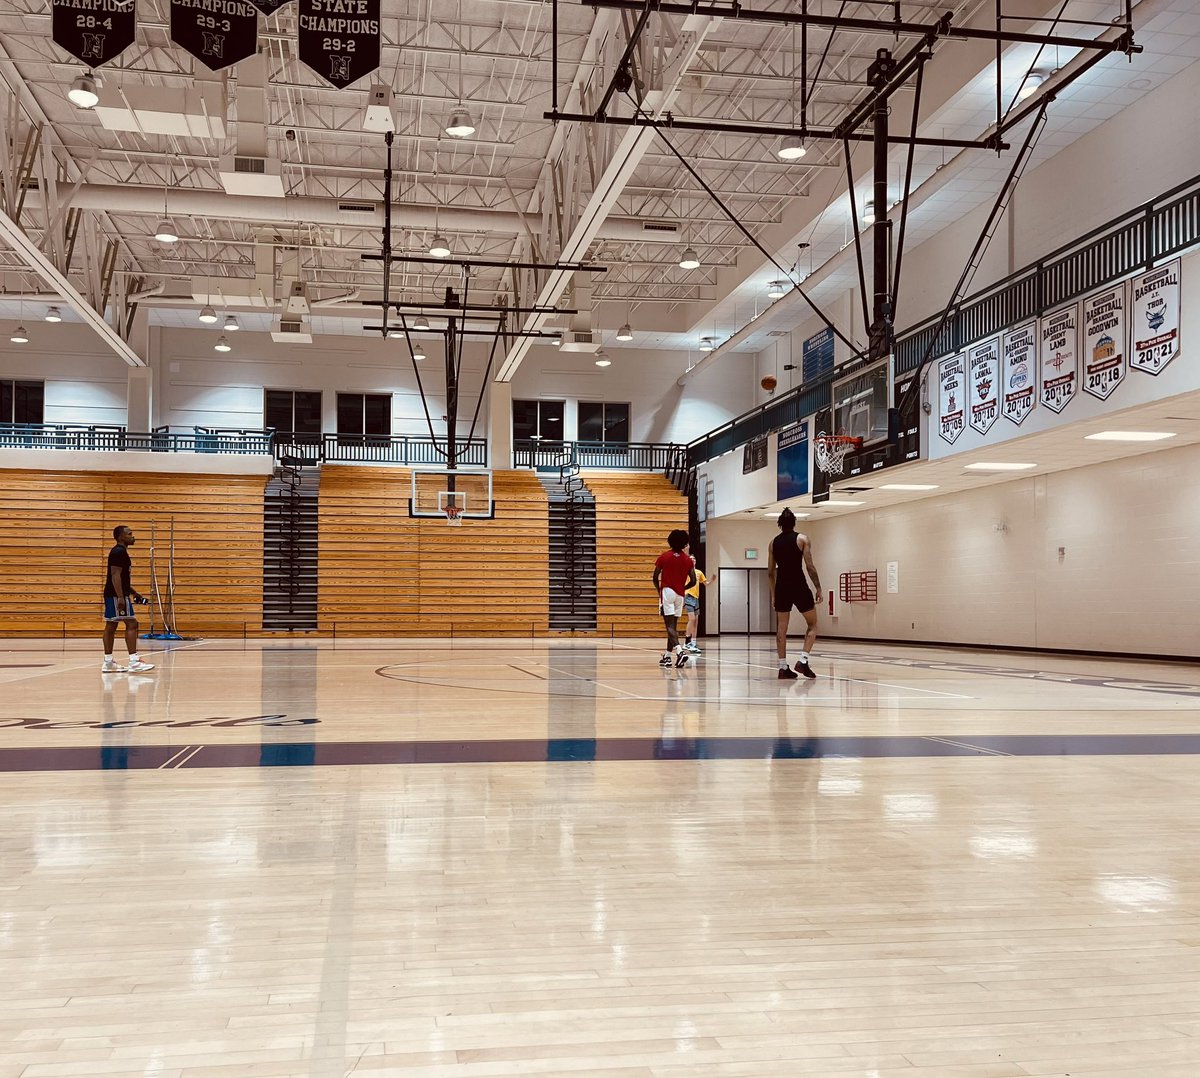 7:30-8:59pm elite time shooting drills. Shooting! People may not believe in you the way I do and it's fine. Just know 'last rep' means 50 more for that reason alone. ⭐️: @showtime_ki ⭐️: @DevinHutch2026 ⭐️: @PierceStrom